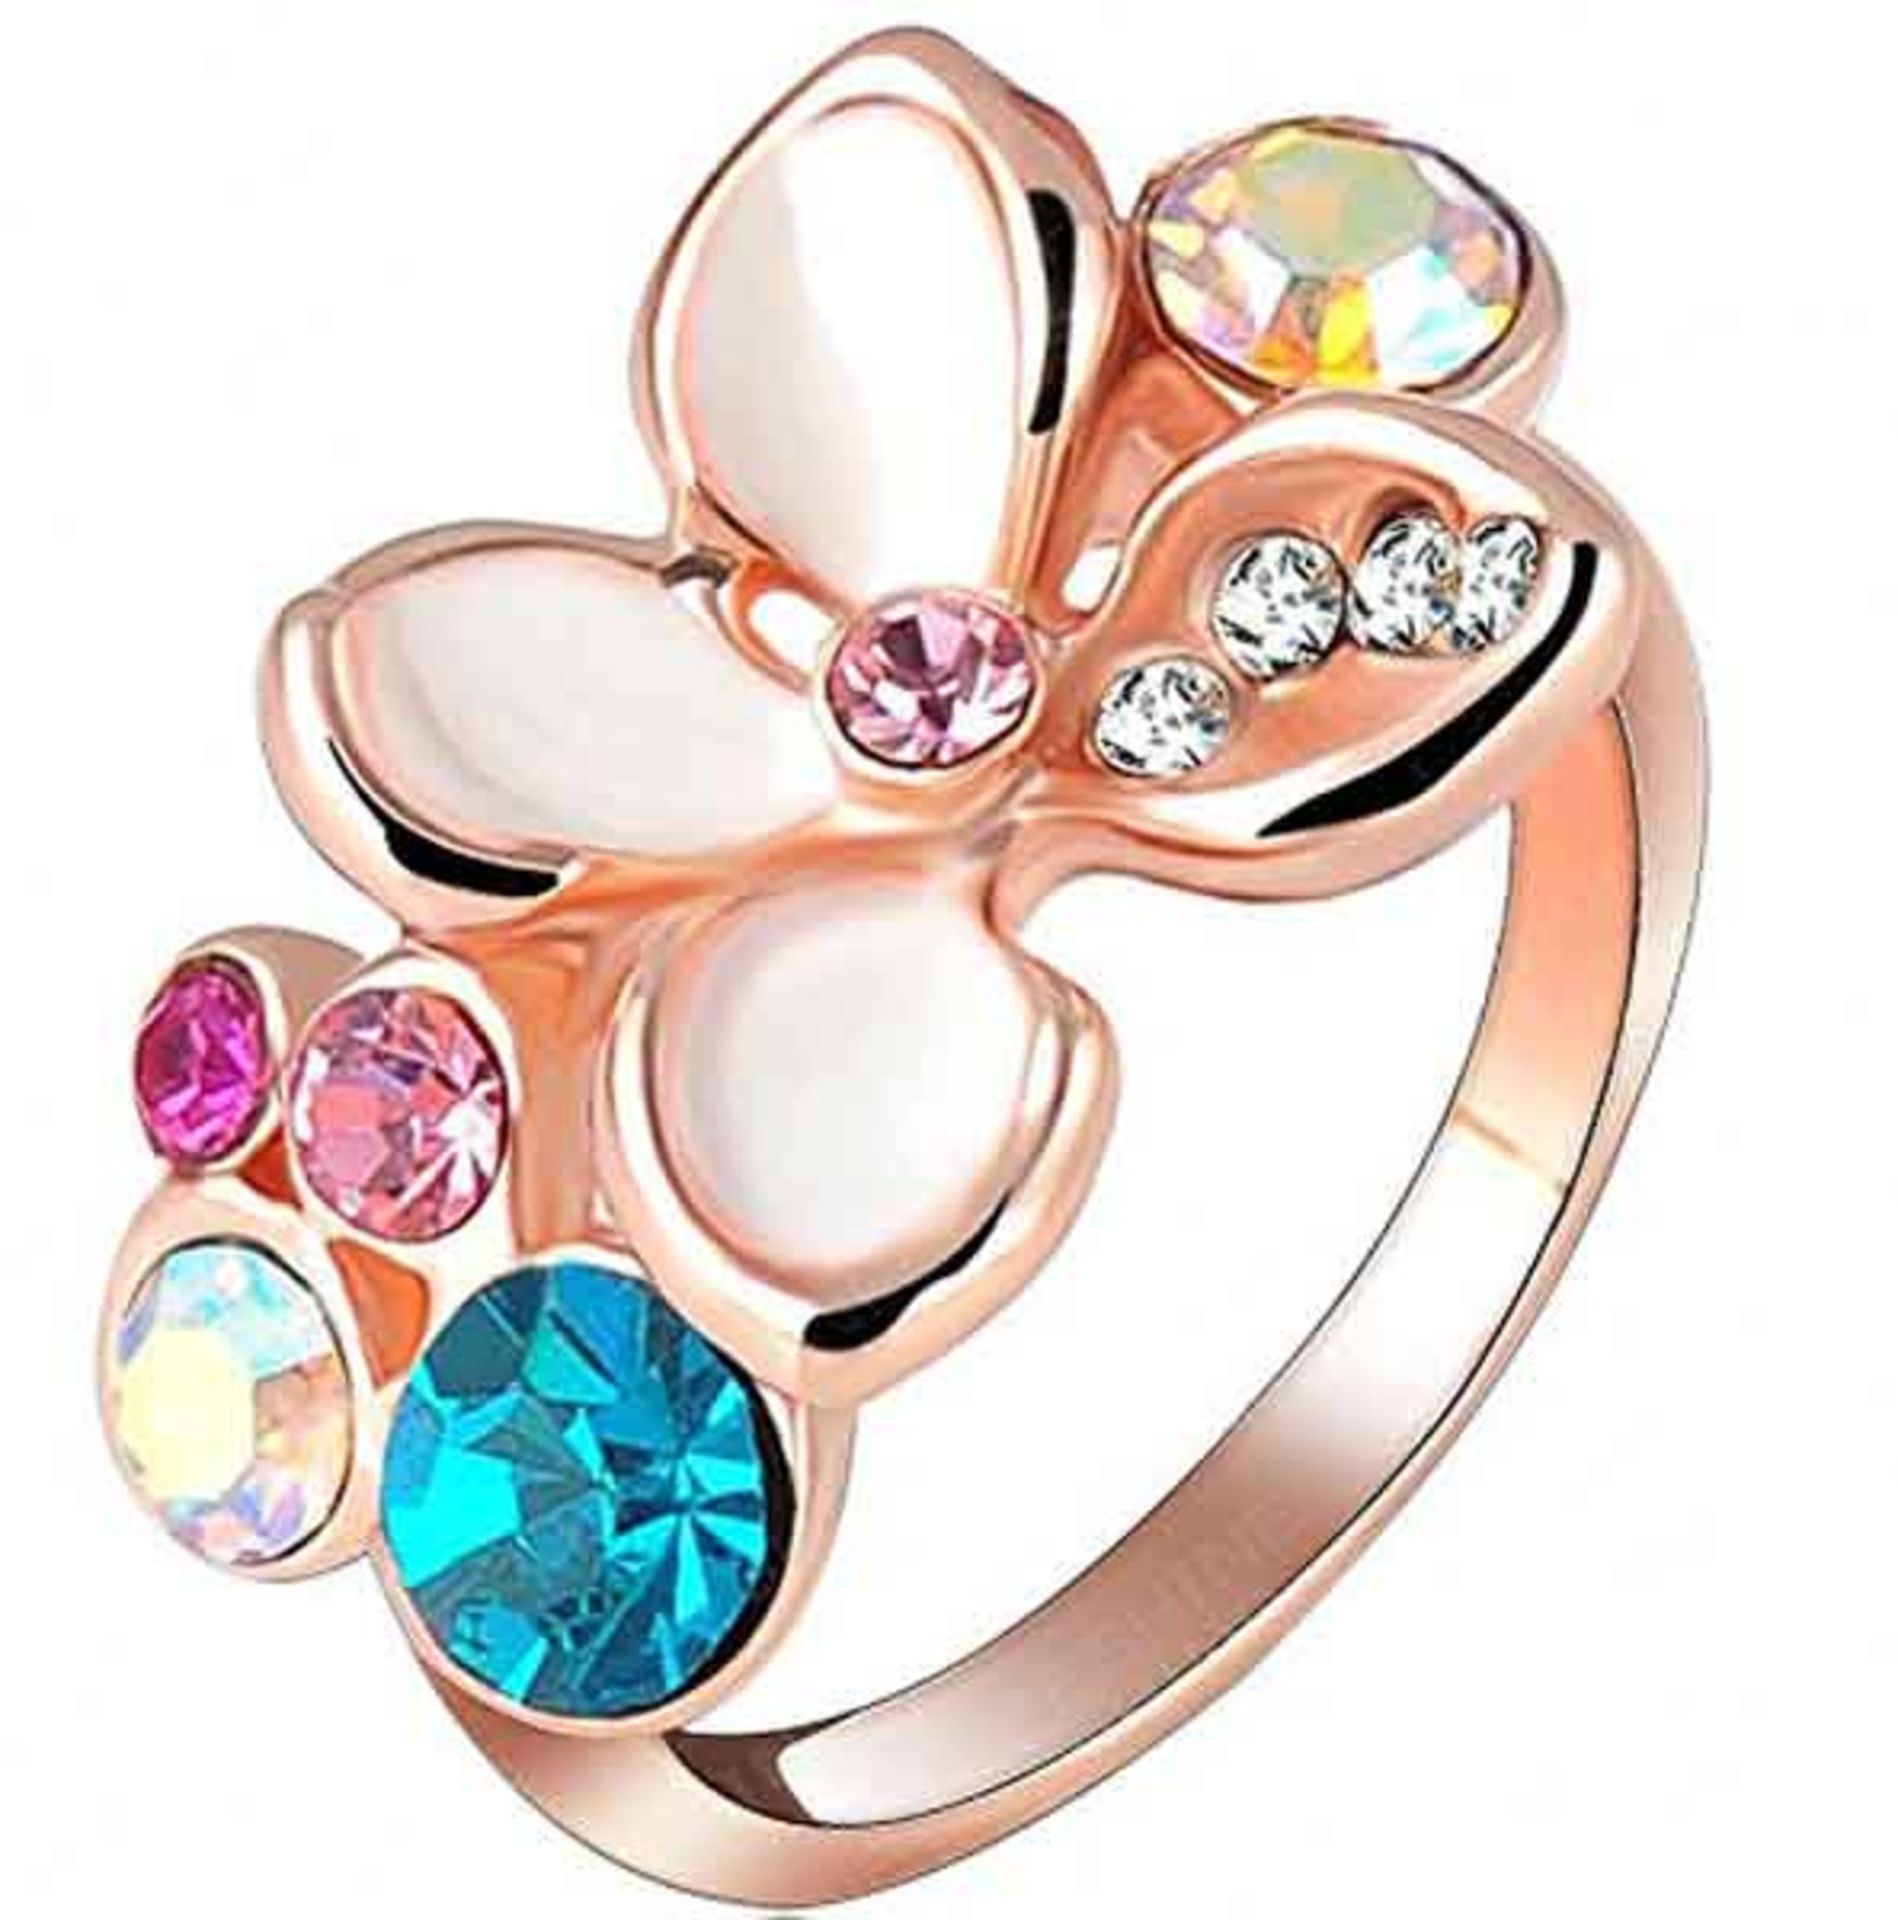 + VAT Brand New Rose Gold Plated White Enamel and Austrian Crystal Ladies Ring